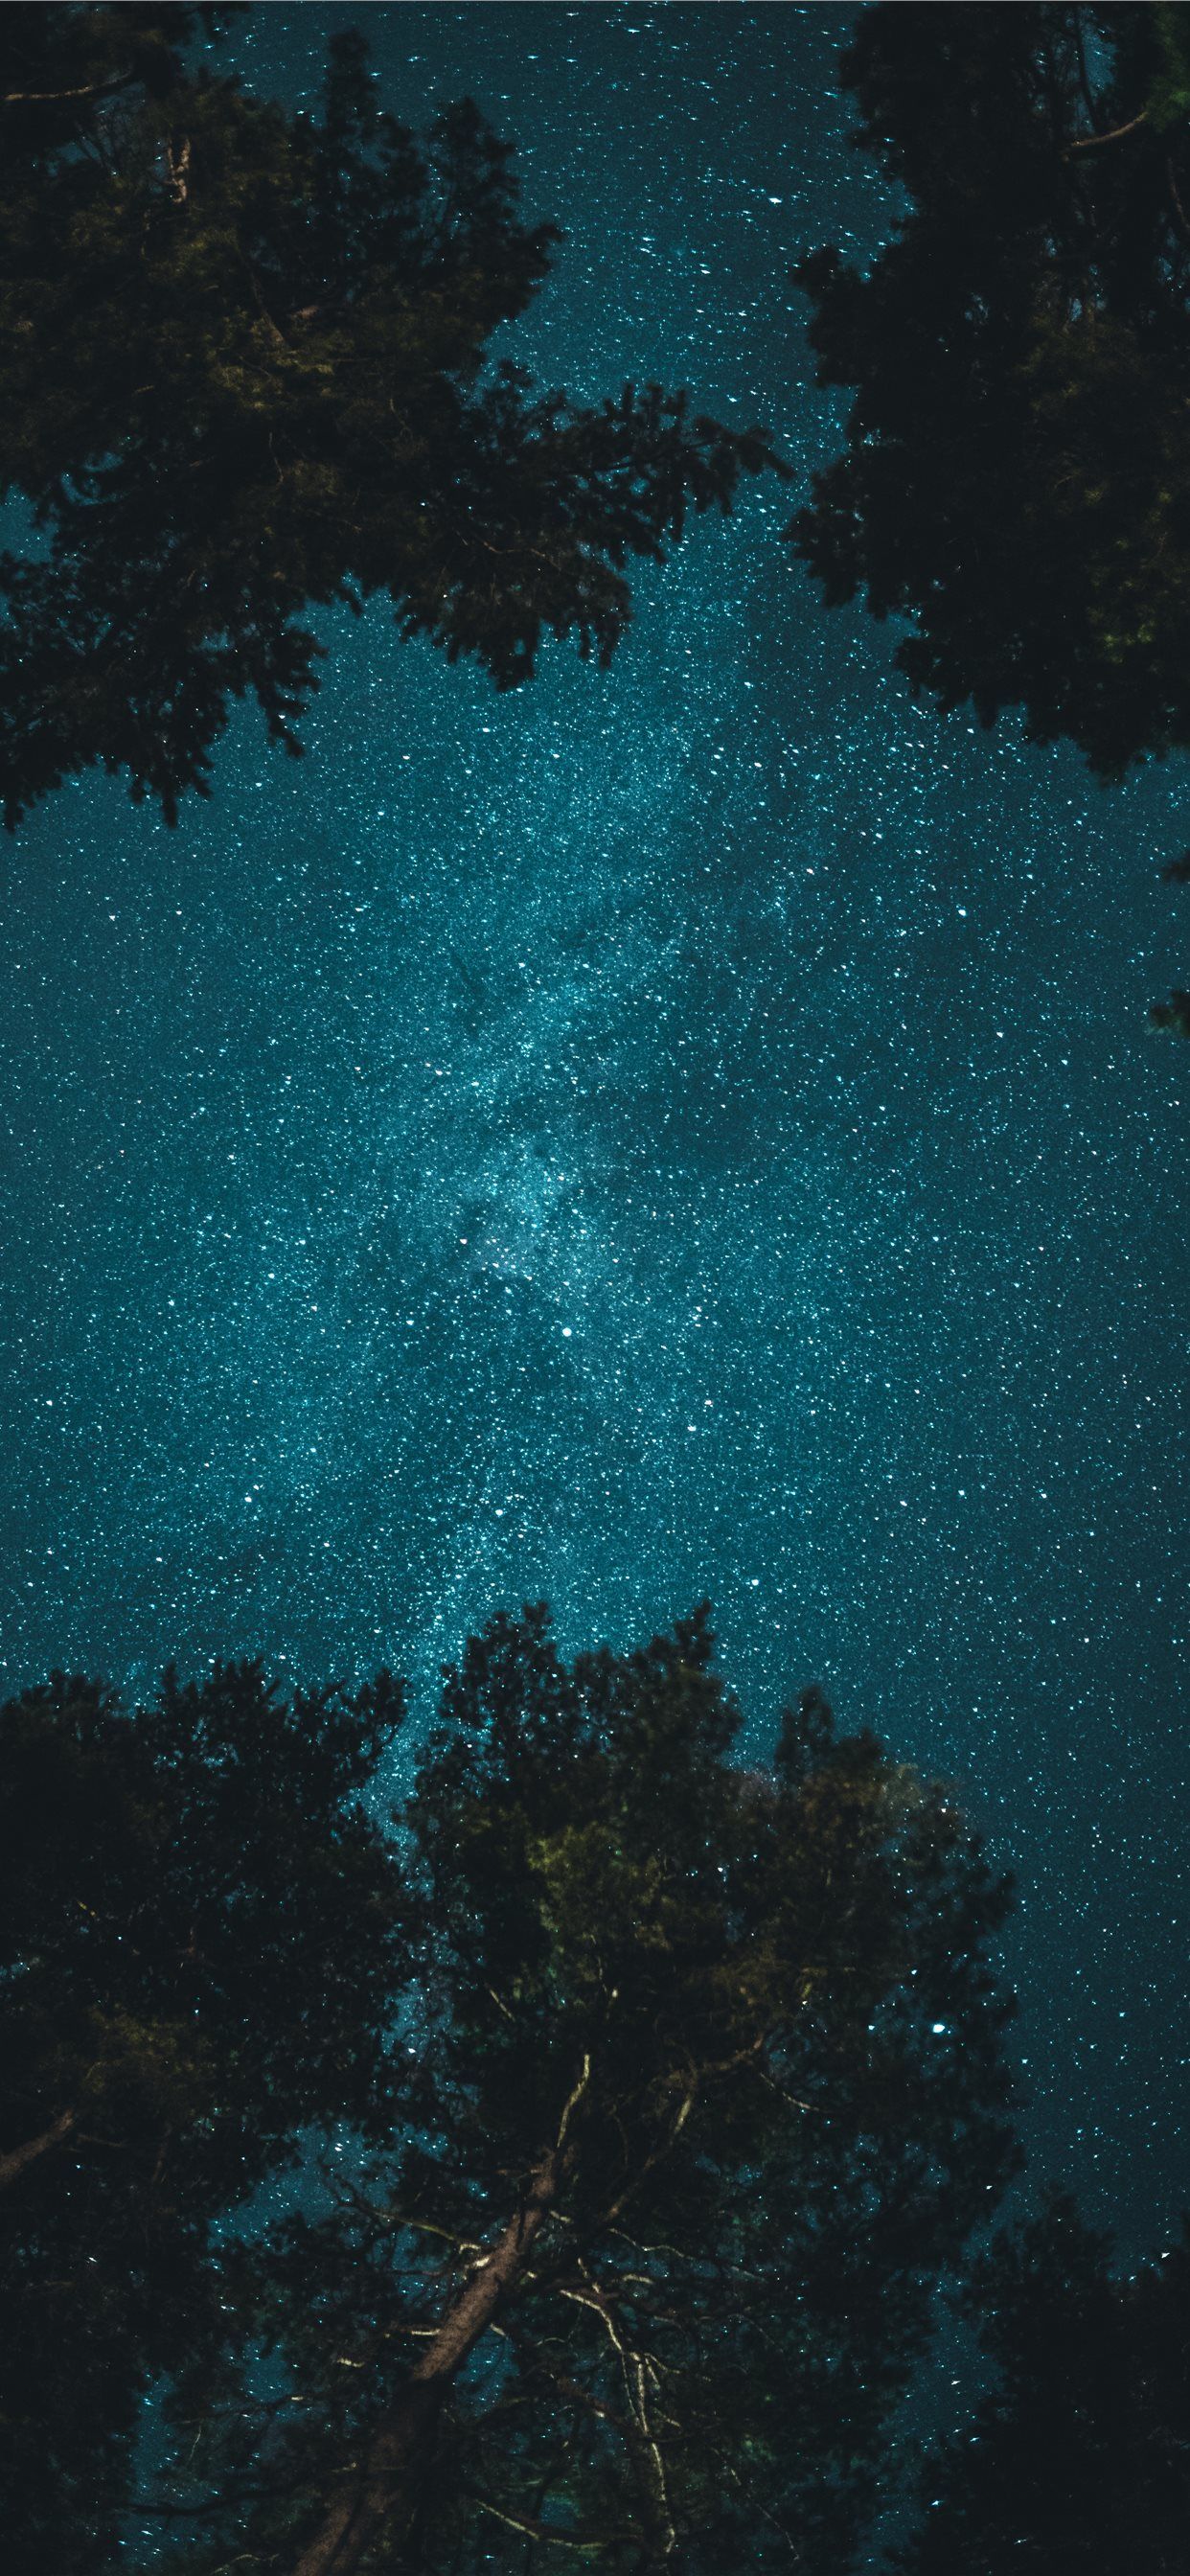 starry night iPhone Wallpaper Free Download